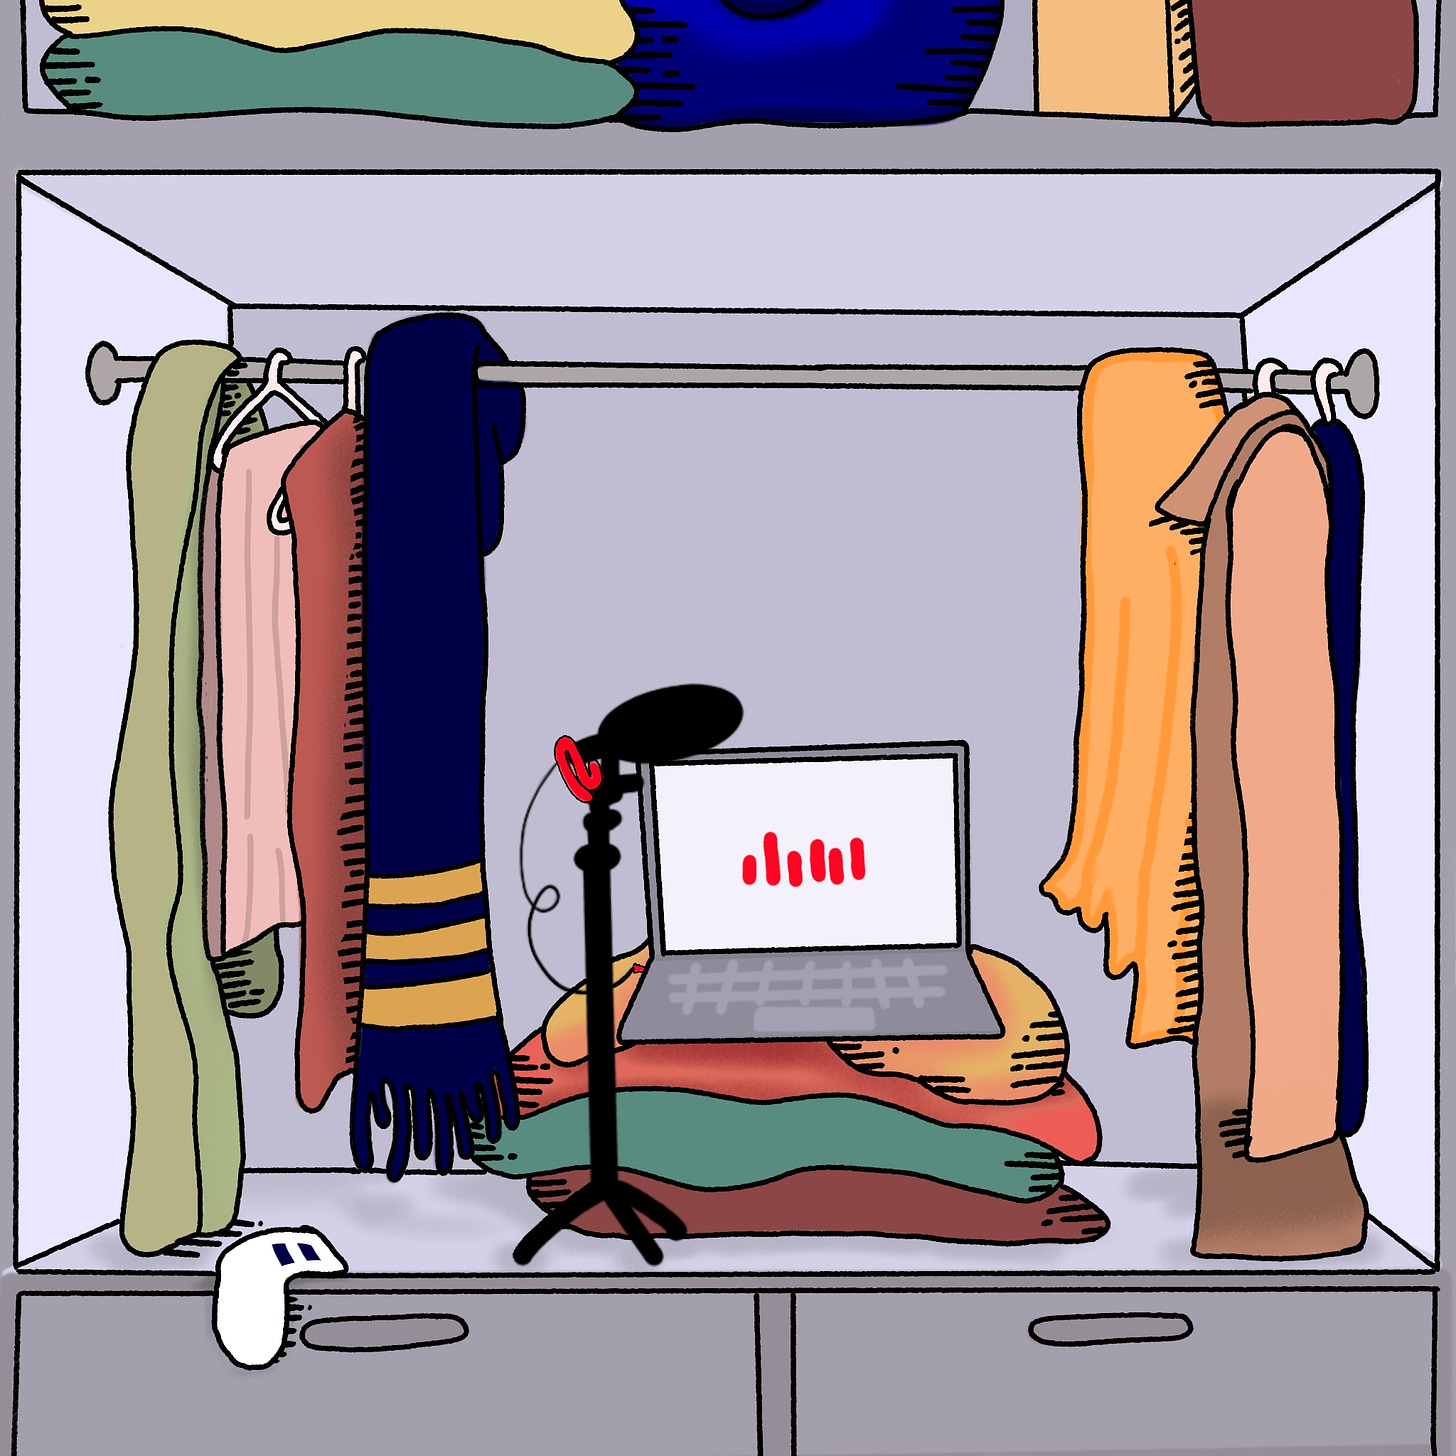 Illustration of a podcasting set-up including a microphone and laptop in a closet full of clothes.